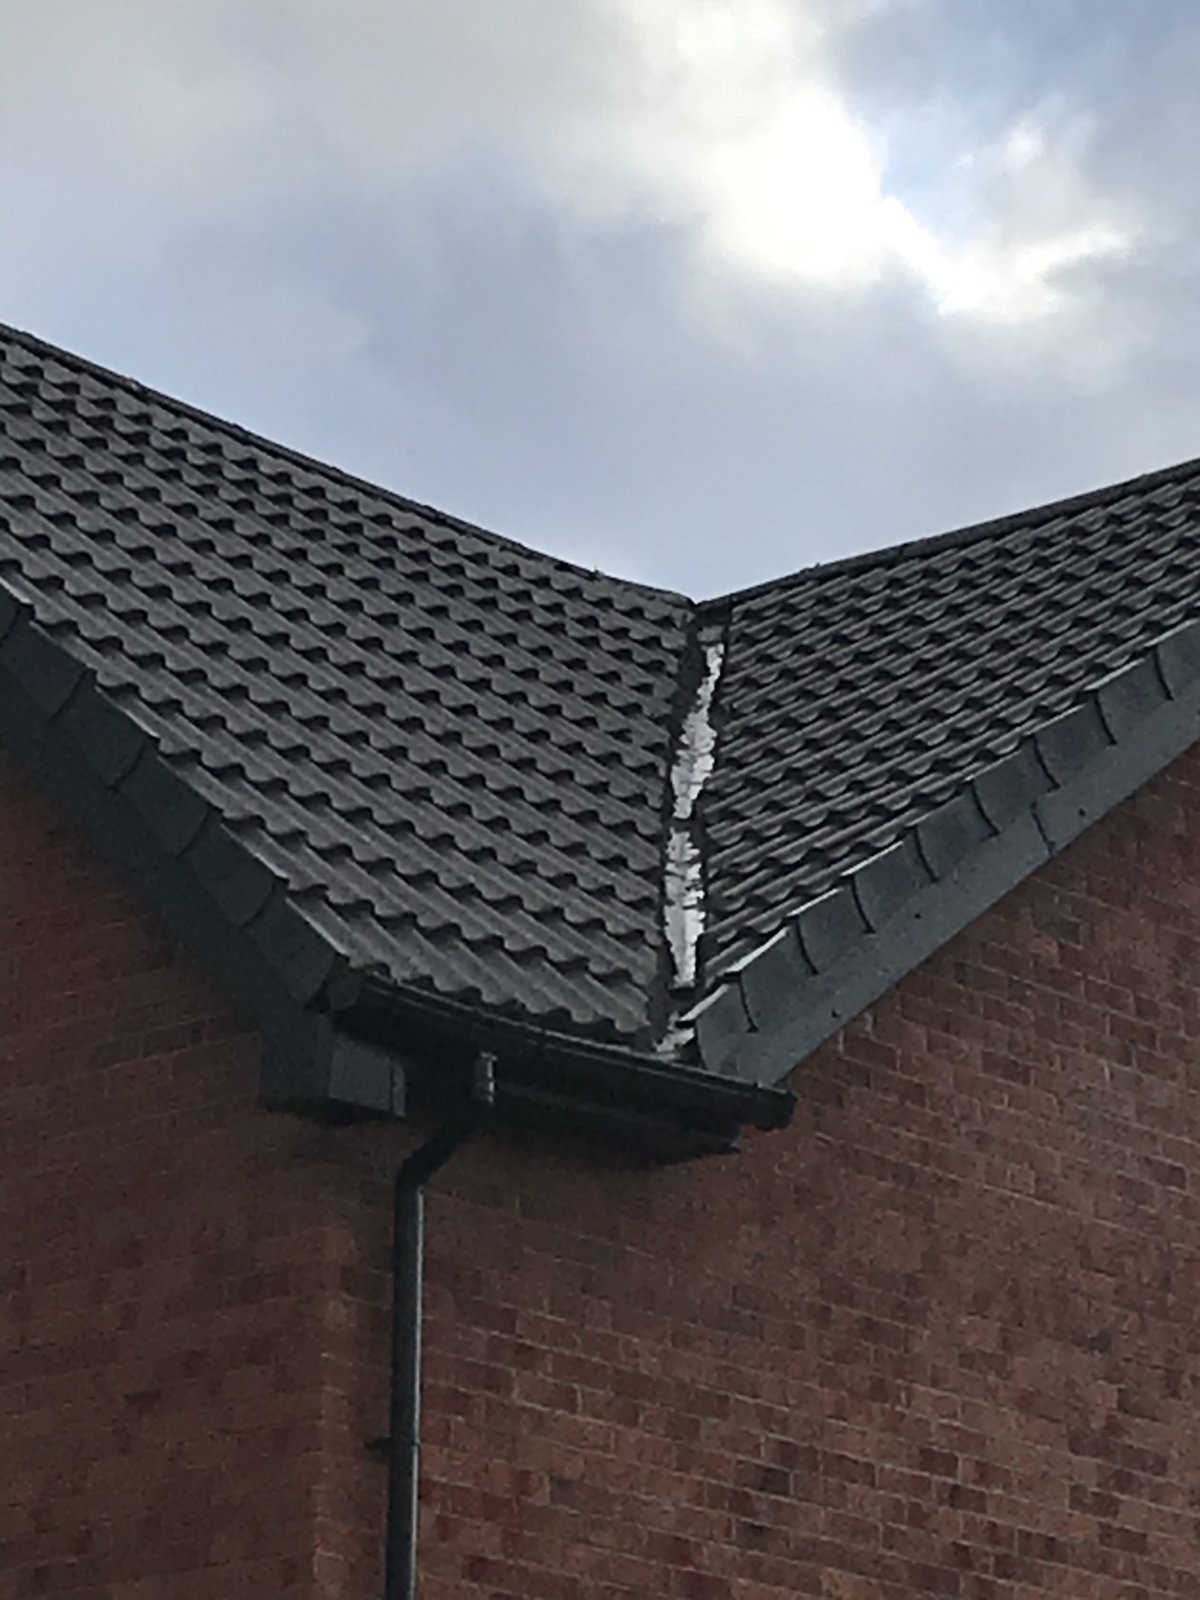 Couple of pics for you roofers, new build near me | DIYnot ...